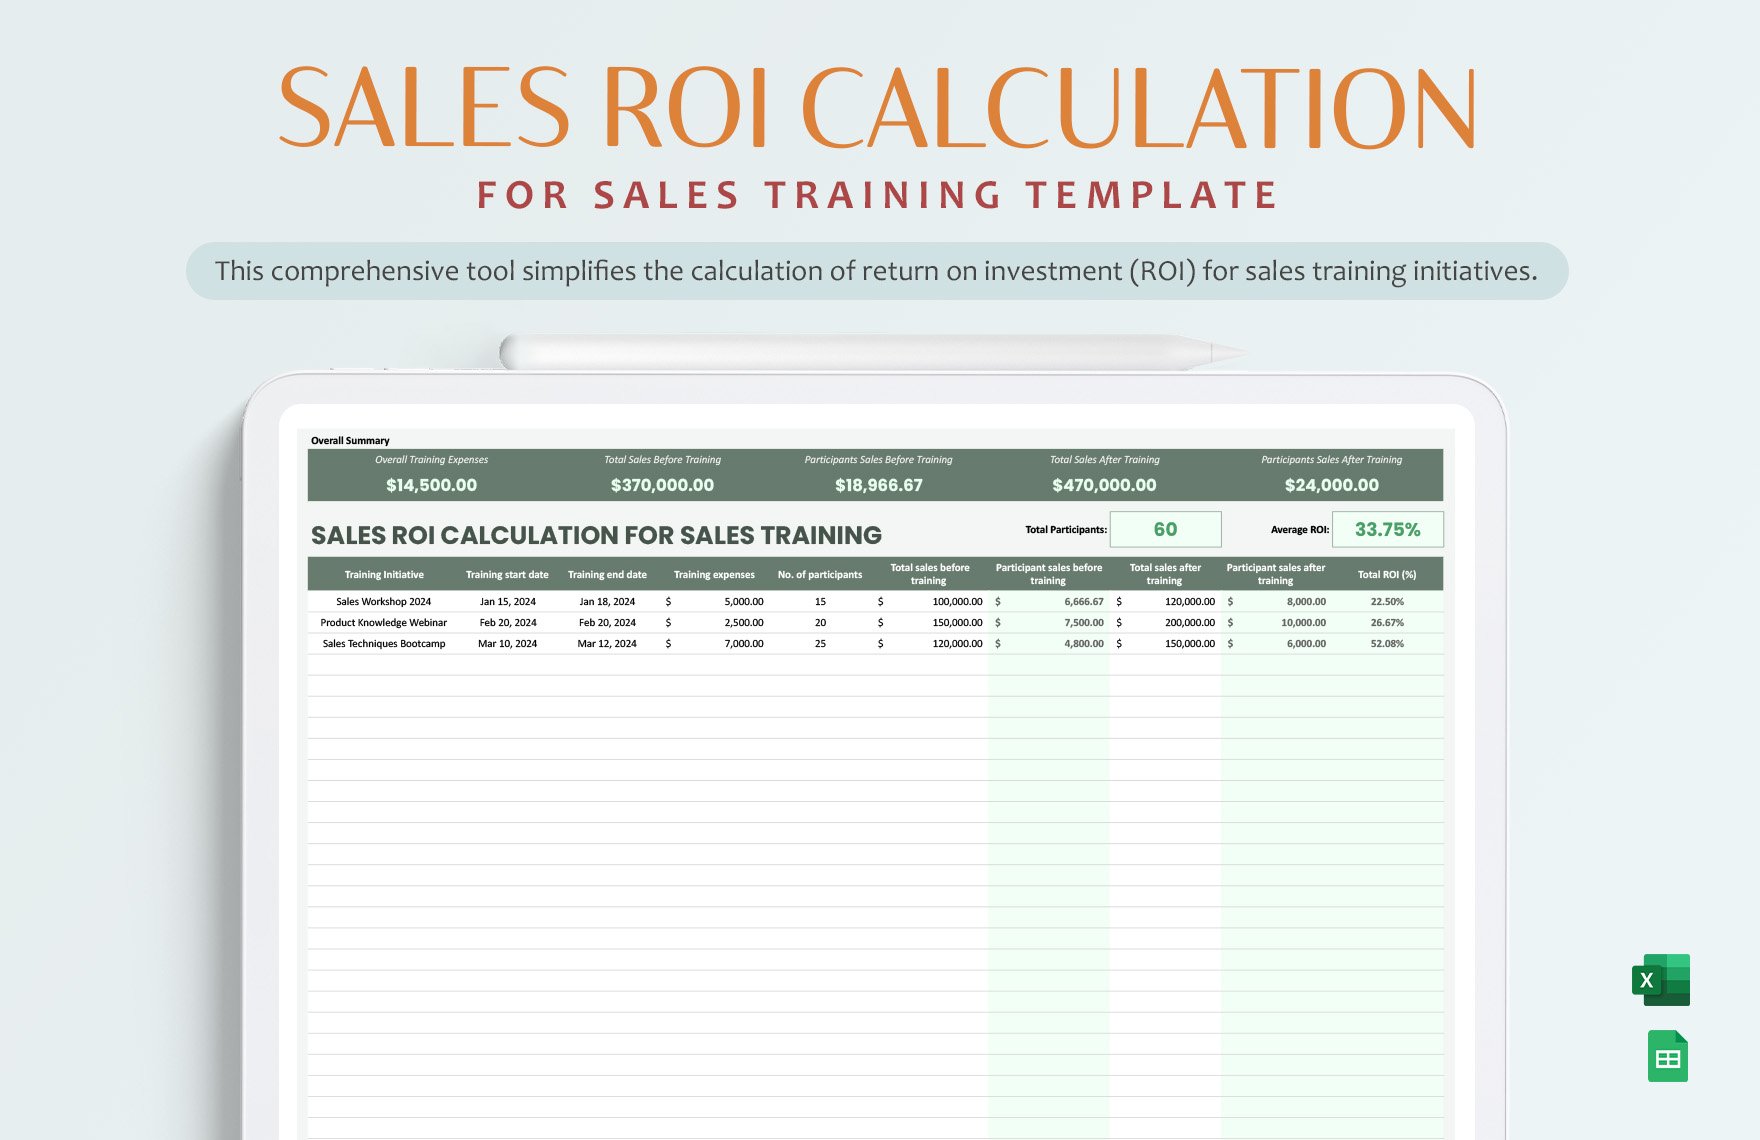 Sales ROI Calculation for Sales Training Template